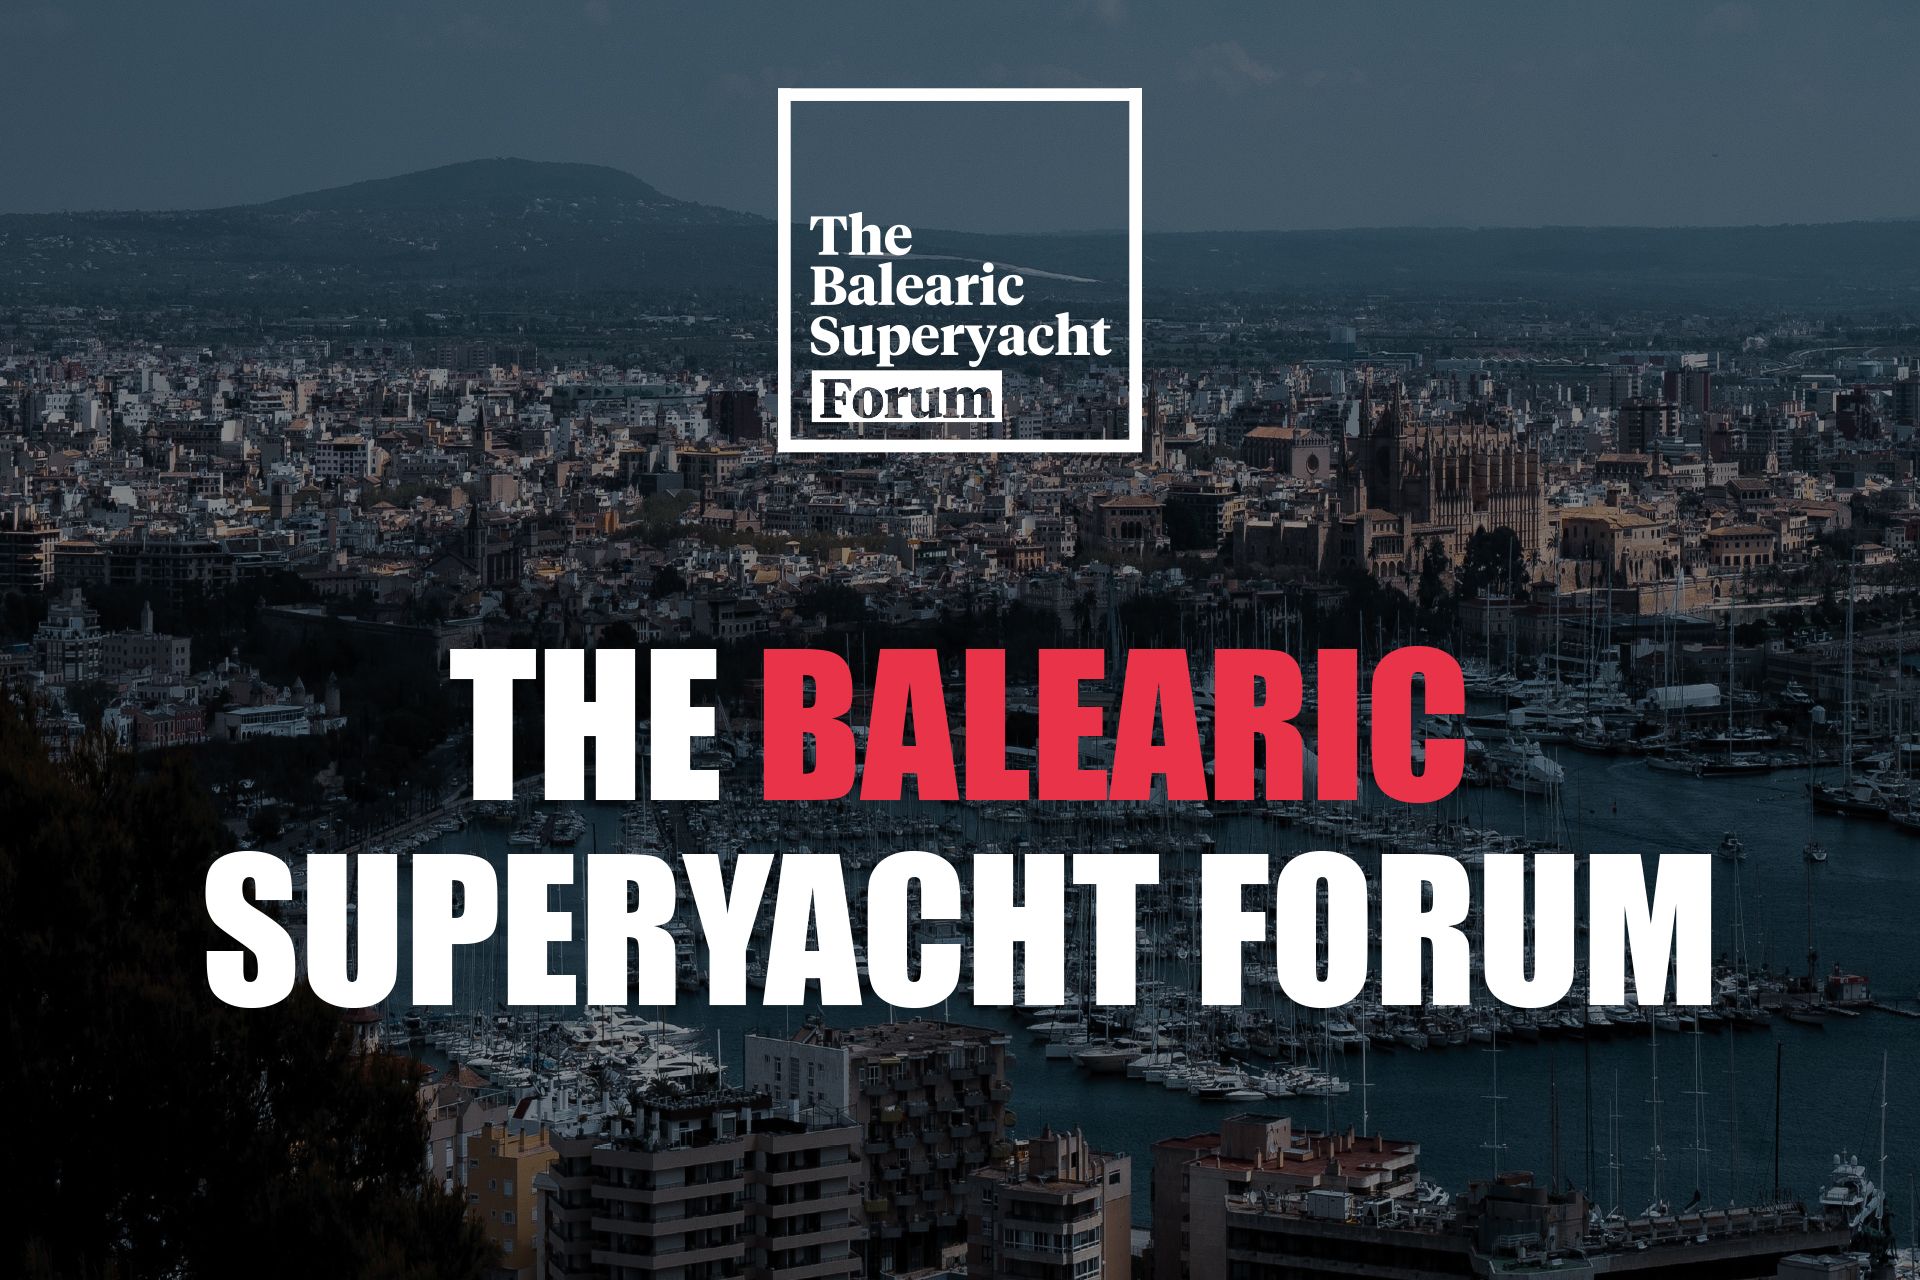 A picture of Palma with the Balearic Superyacht Forum logo